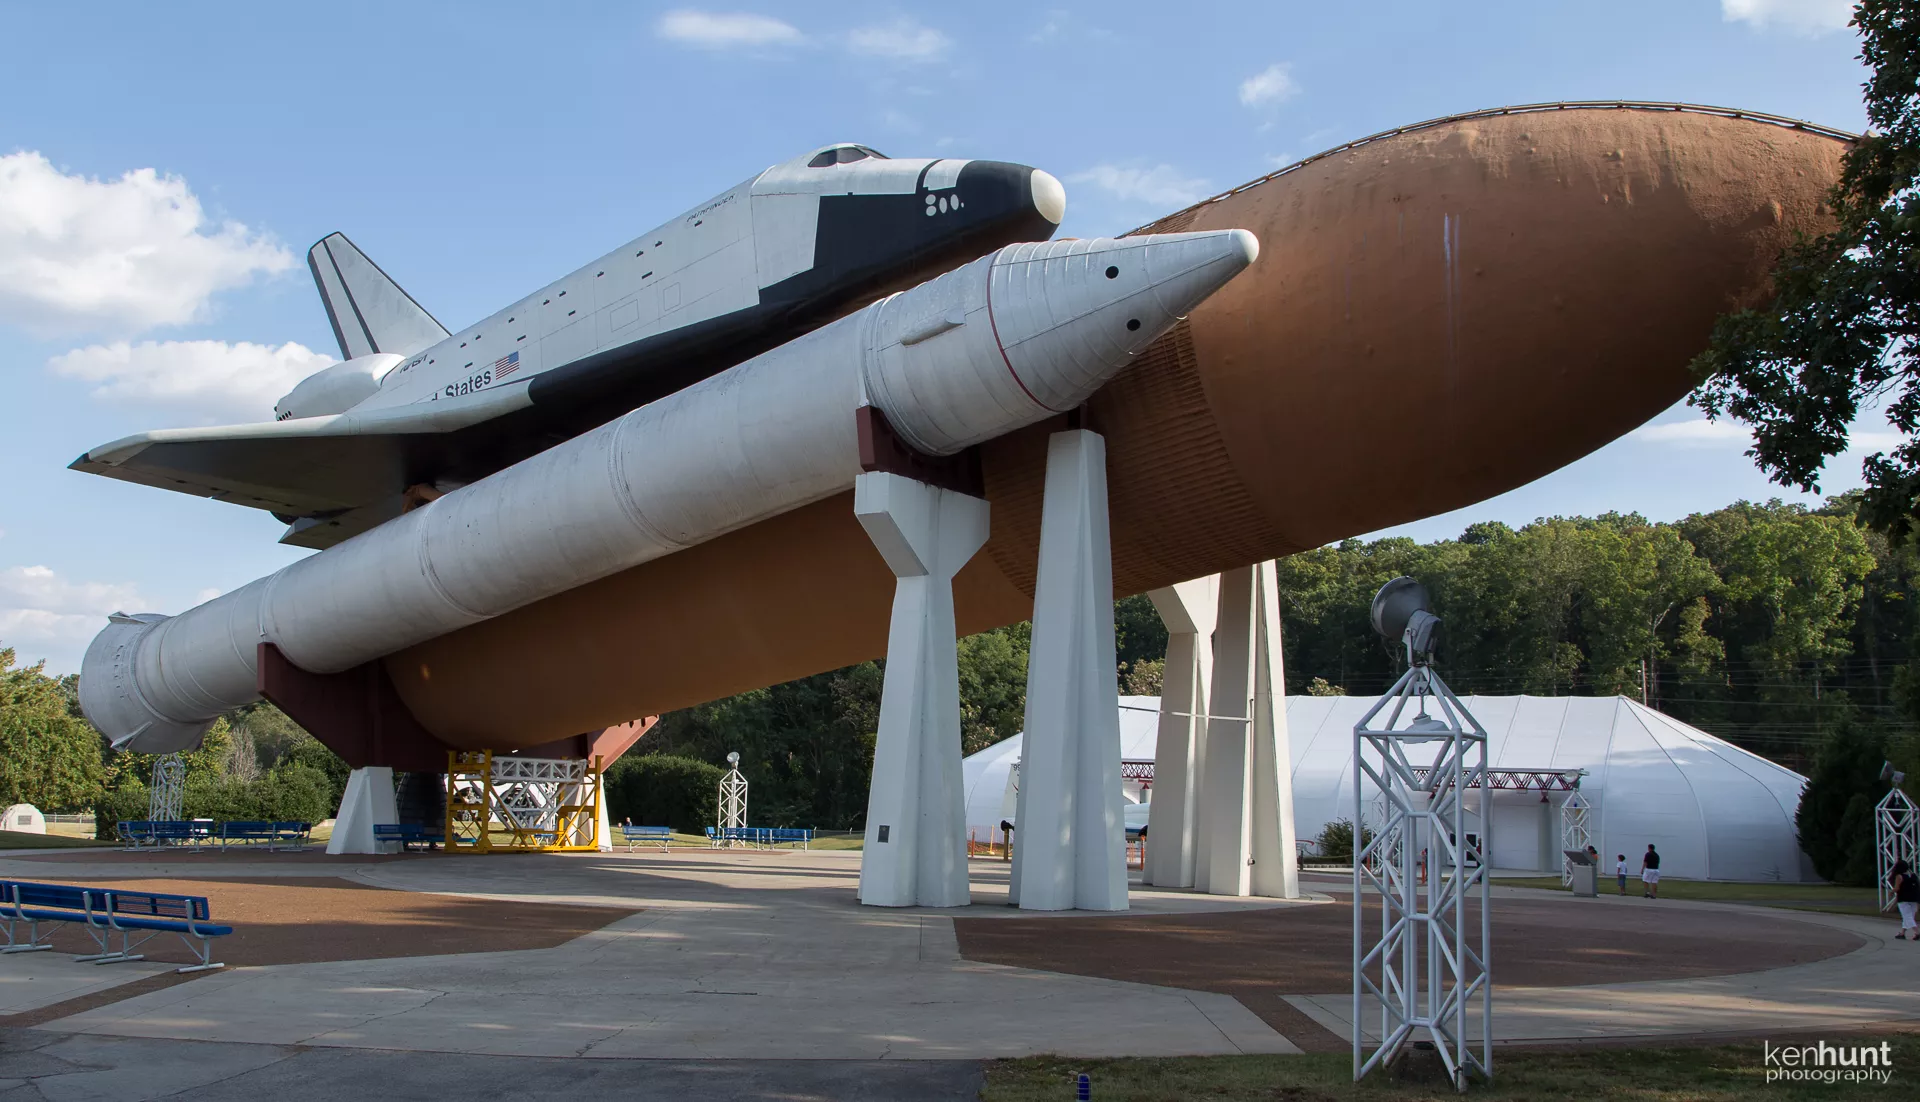 U.S. Space and Rocket Center in USA, North America | Museums - Rated 4